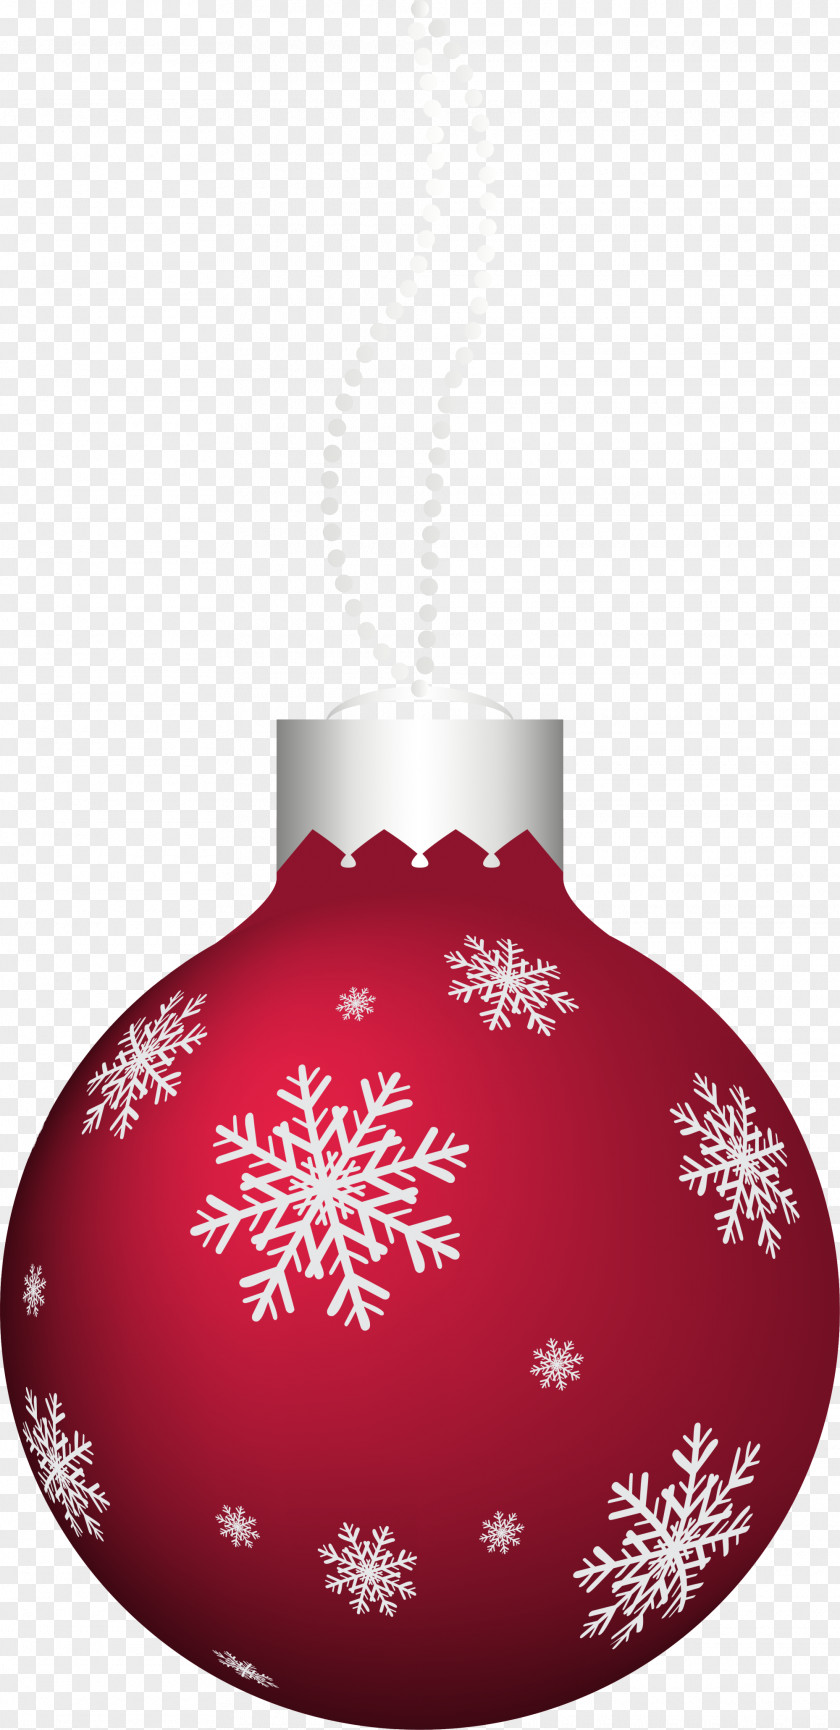 Red Snowflake Pendant Schema Christmas Ornament PNG